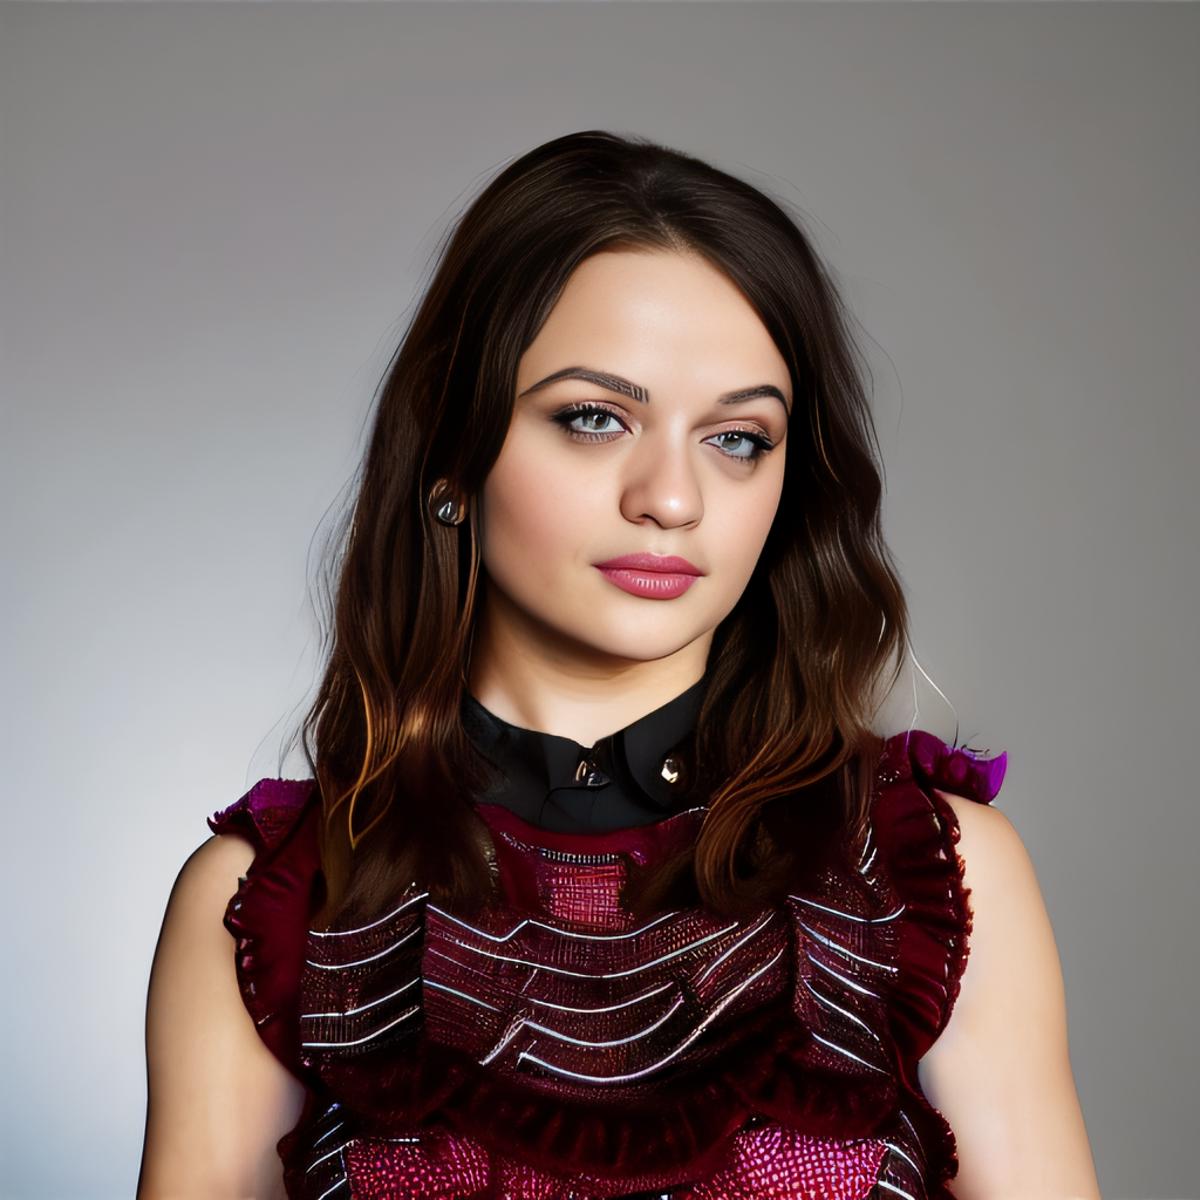 Joey King image by parar20